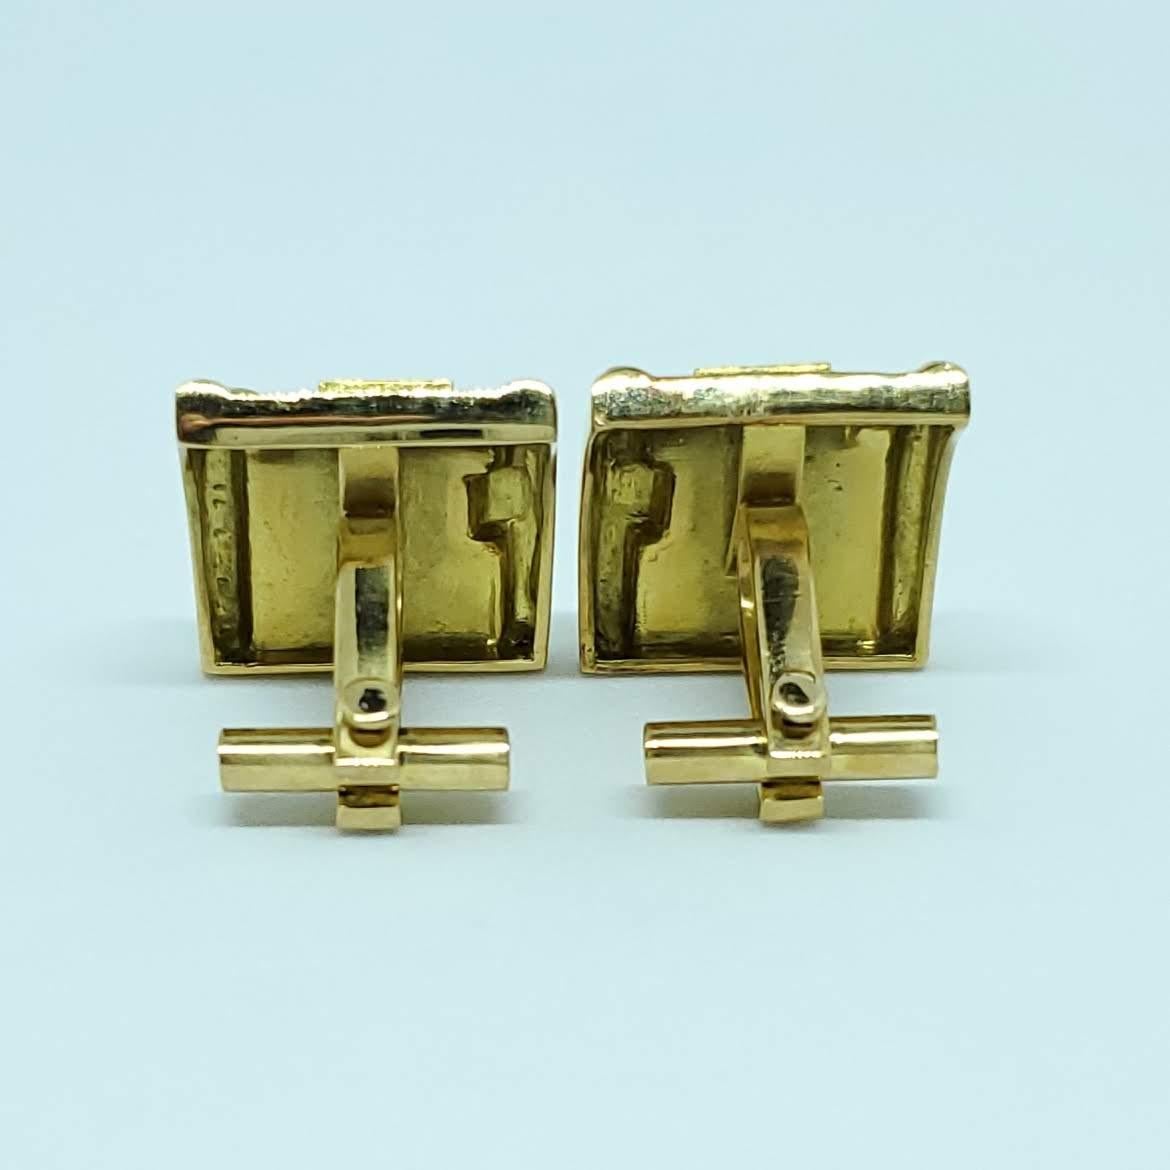 Burle Marx 18 Karat Gold Cufflinks  In Good Condition For Sale In Woodway, TX